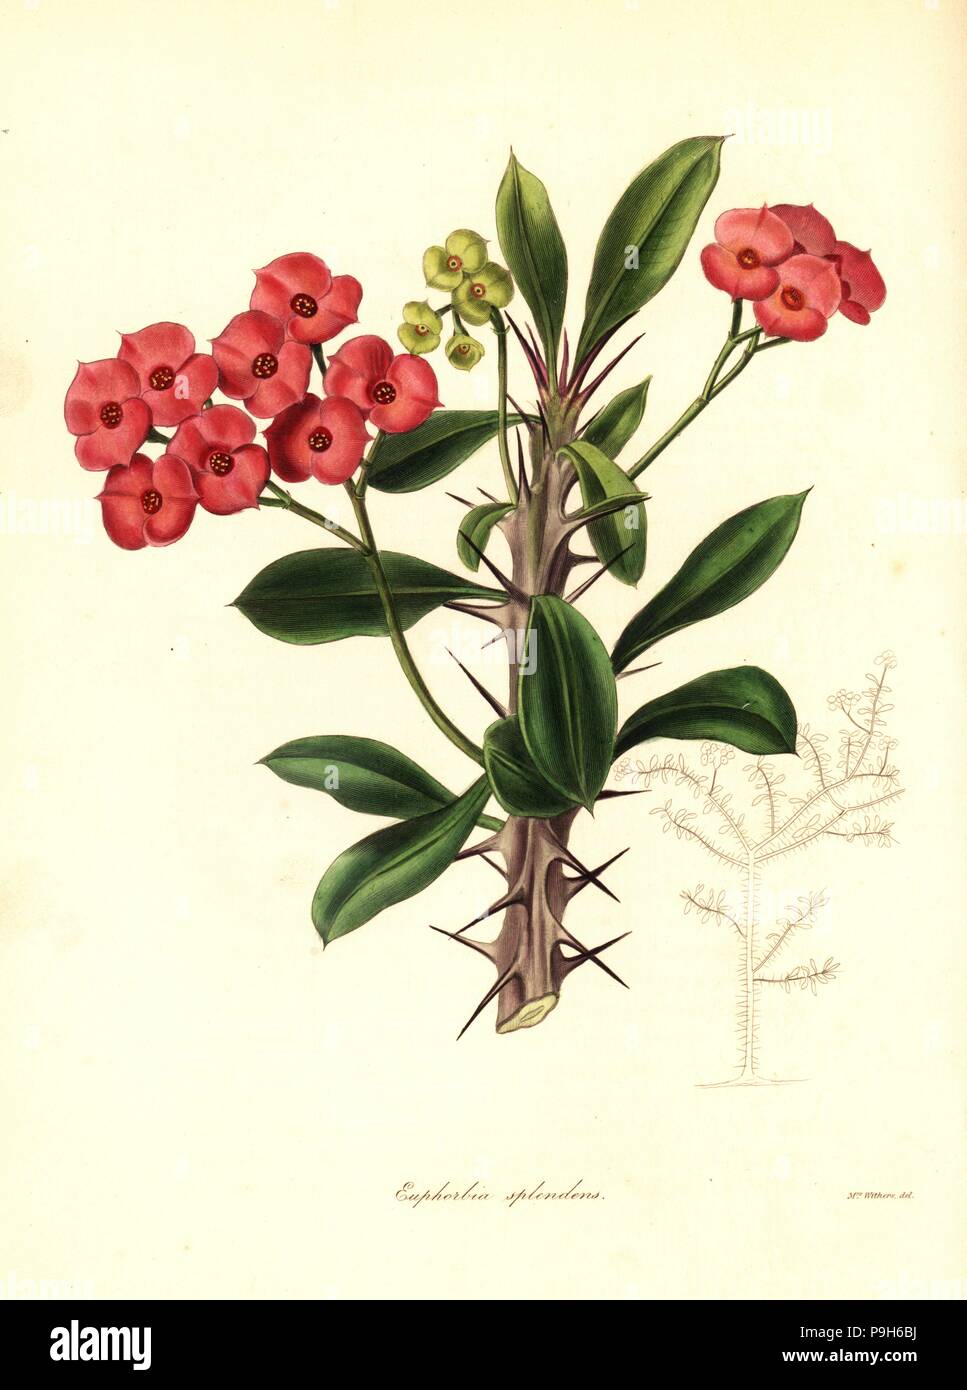 Crown of thorns, Christ plant or Christ thorn, Euphorbia milii var. splendens (Spendid euphorbia, Euphorbia splendens). Handcoloured copperplate engraving after a botanical illustration by Mrs Augusta Withers from Benjamin Maund and the Rev. John Stevens Henslow's The Botanist, London, 1836. Stock Photo